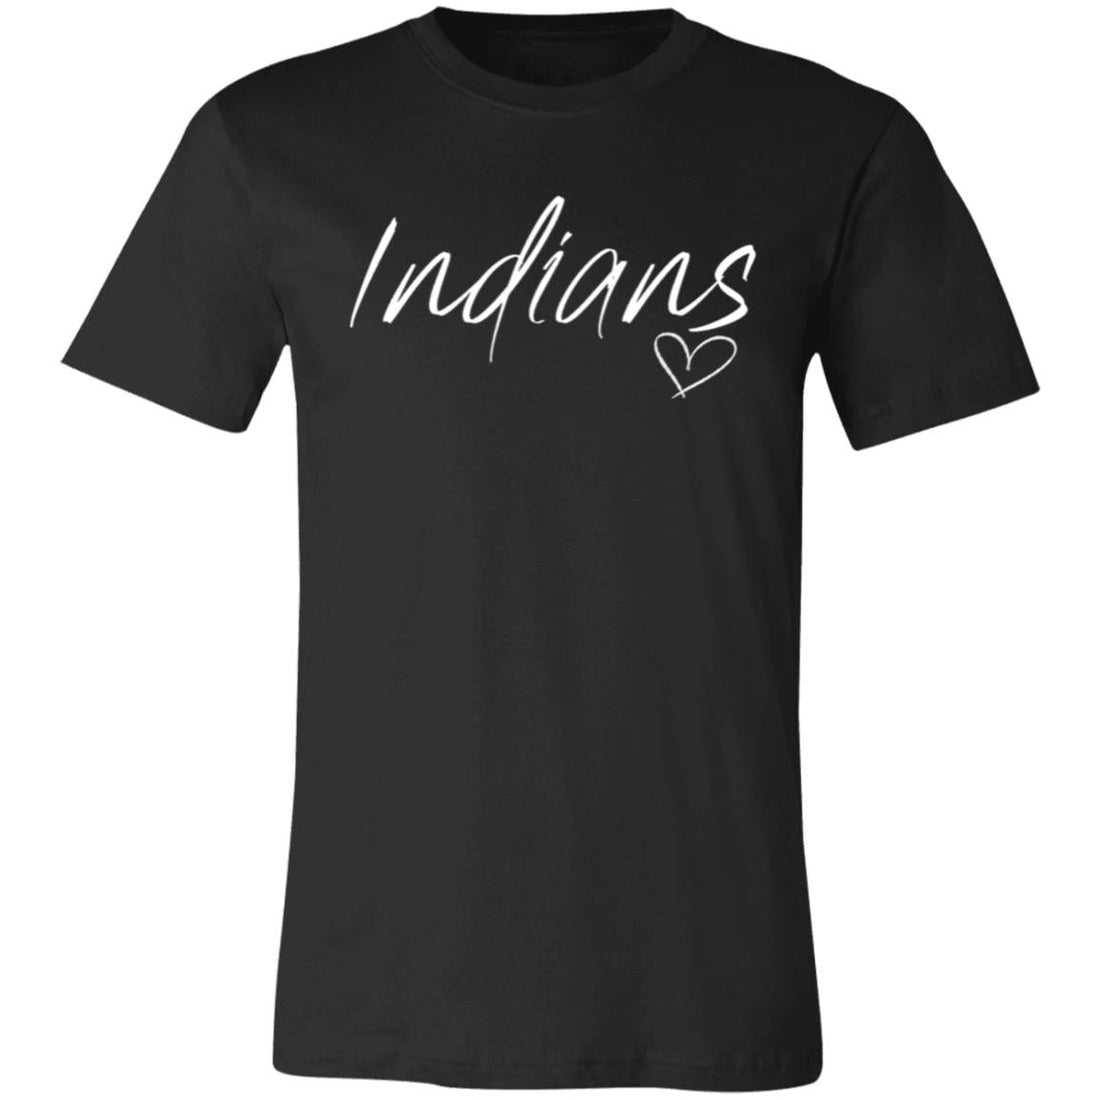 Indians Heart T-Shirt - T-Shirts - Positively Sassy - Indians Heart T-Shirt